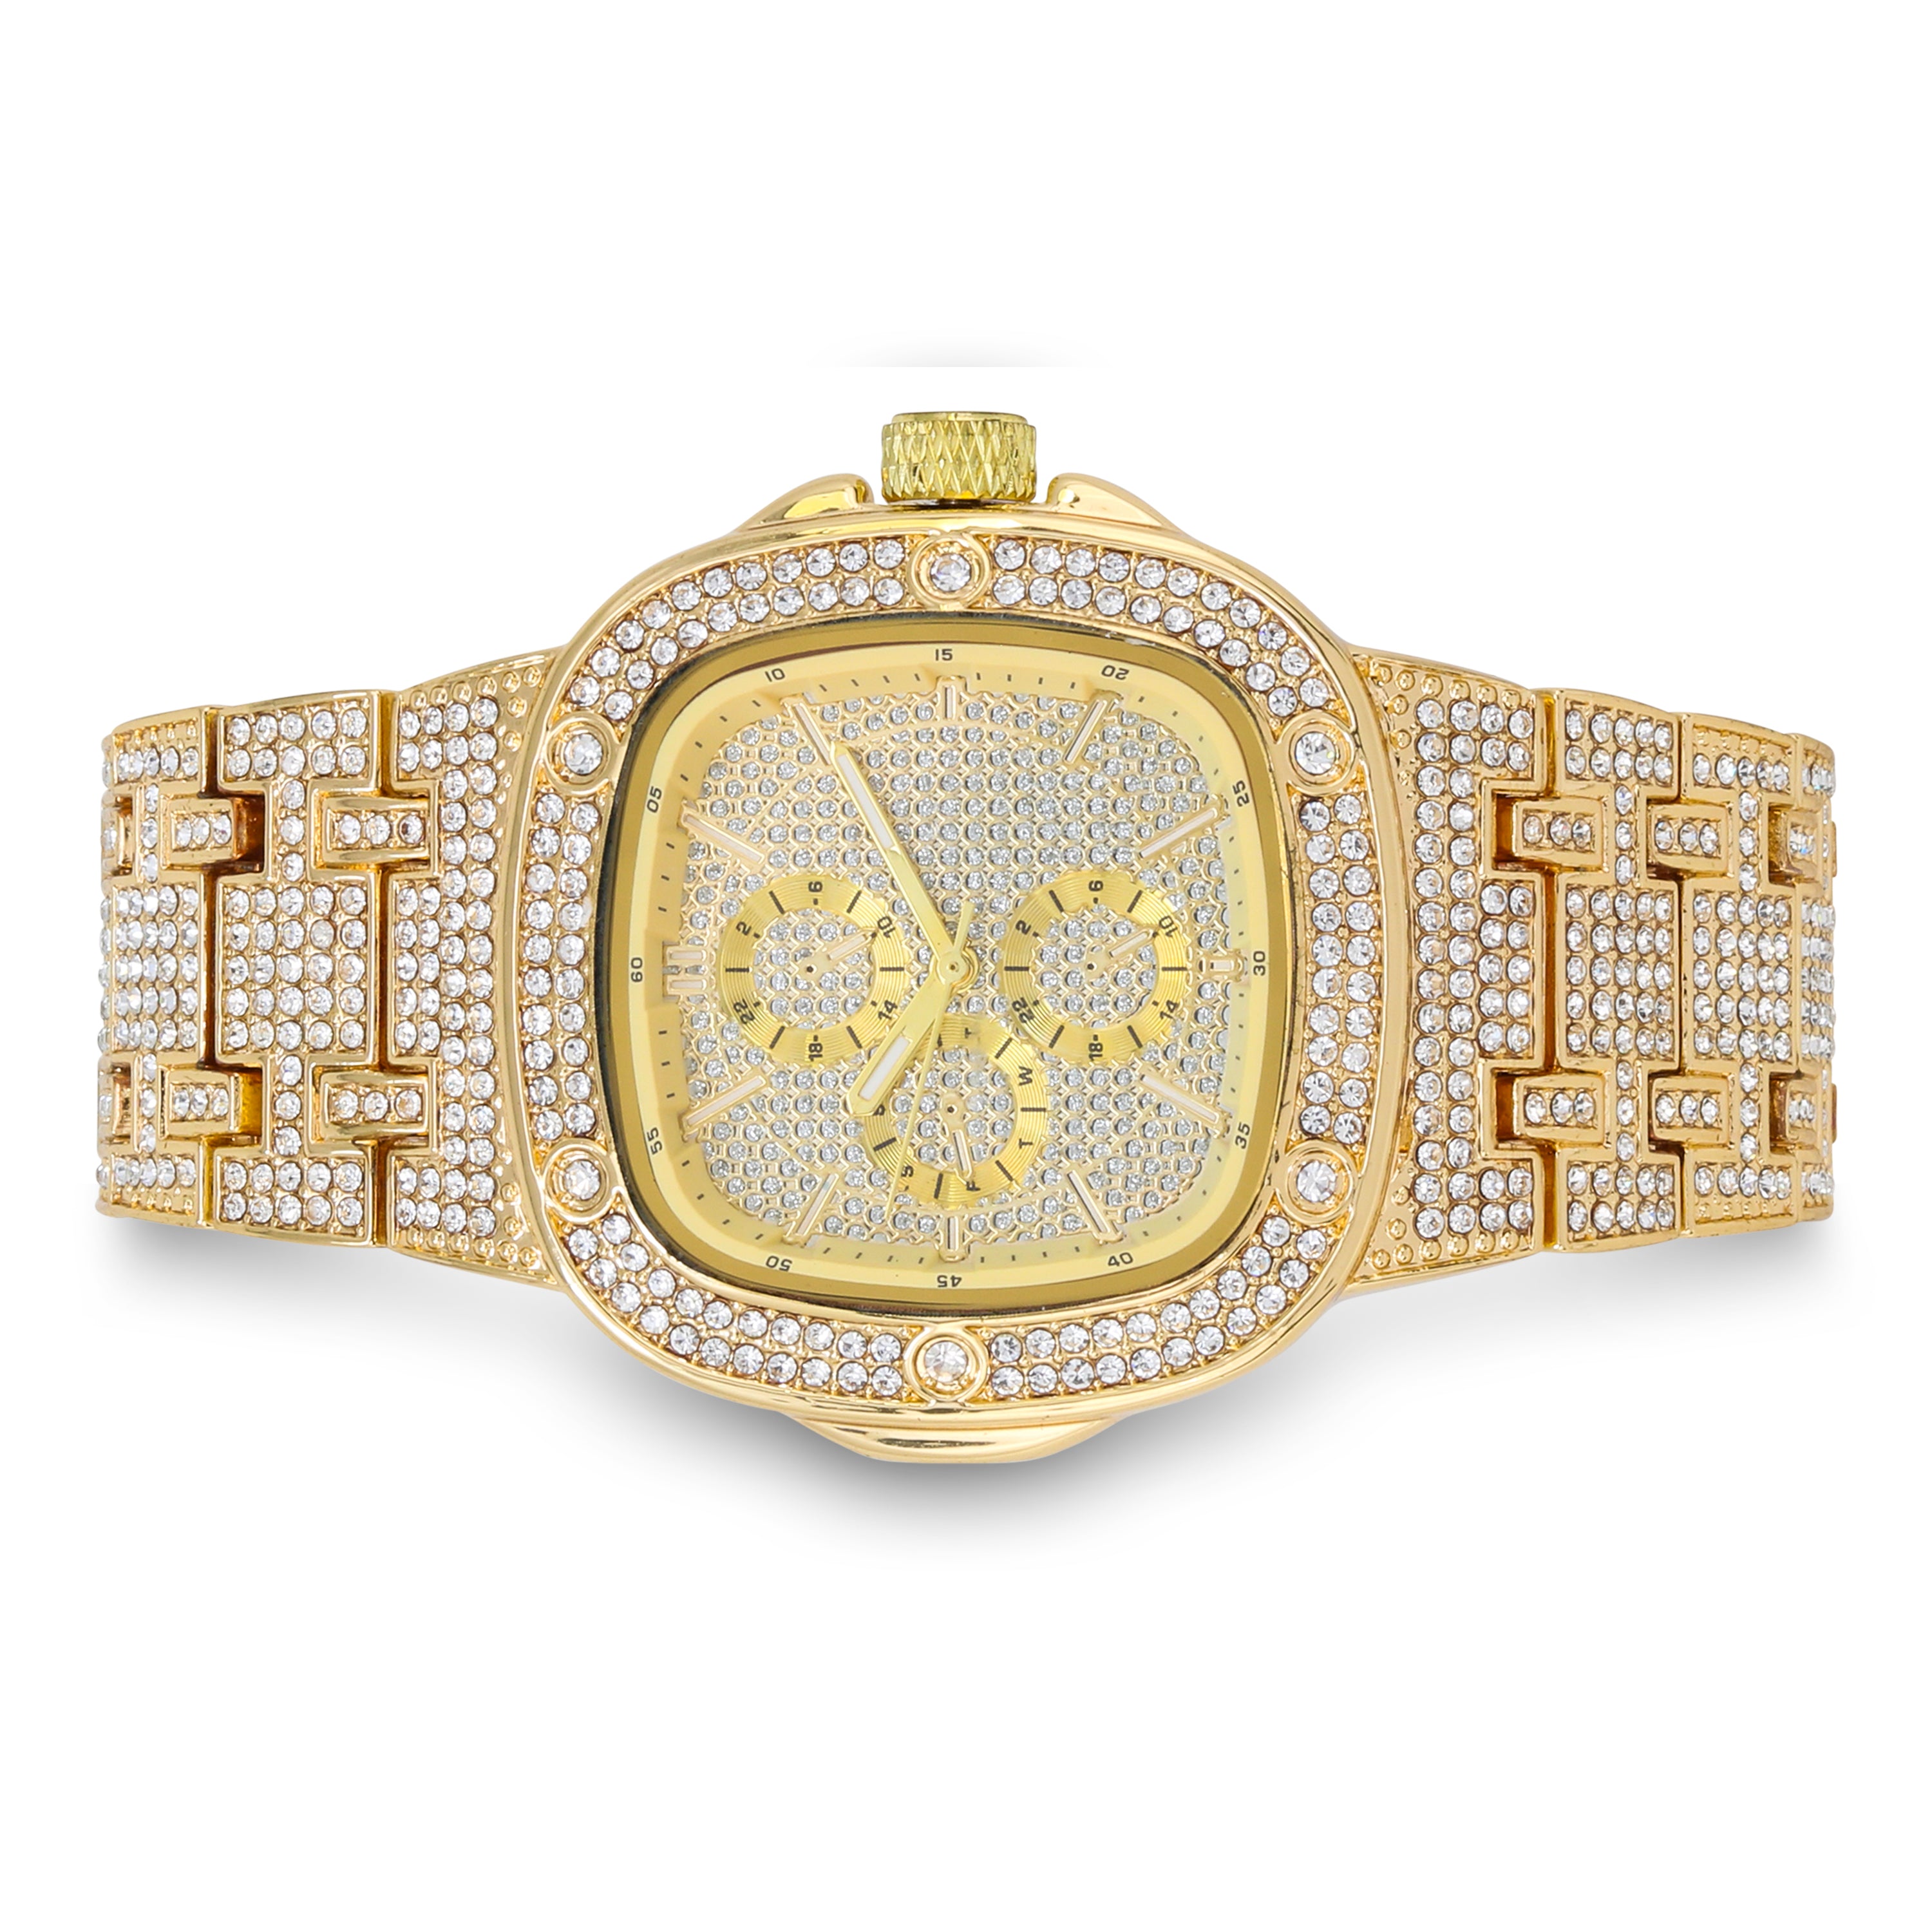 Women's Iced Out Watch 42mm Gold - Square Dial